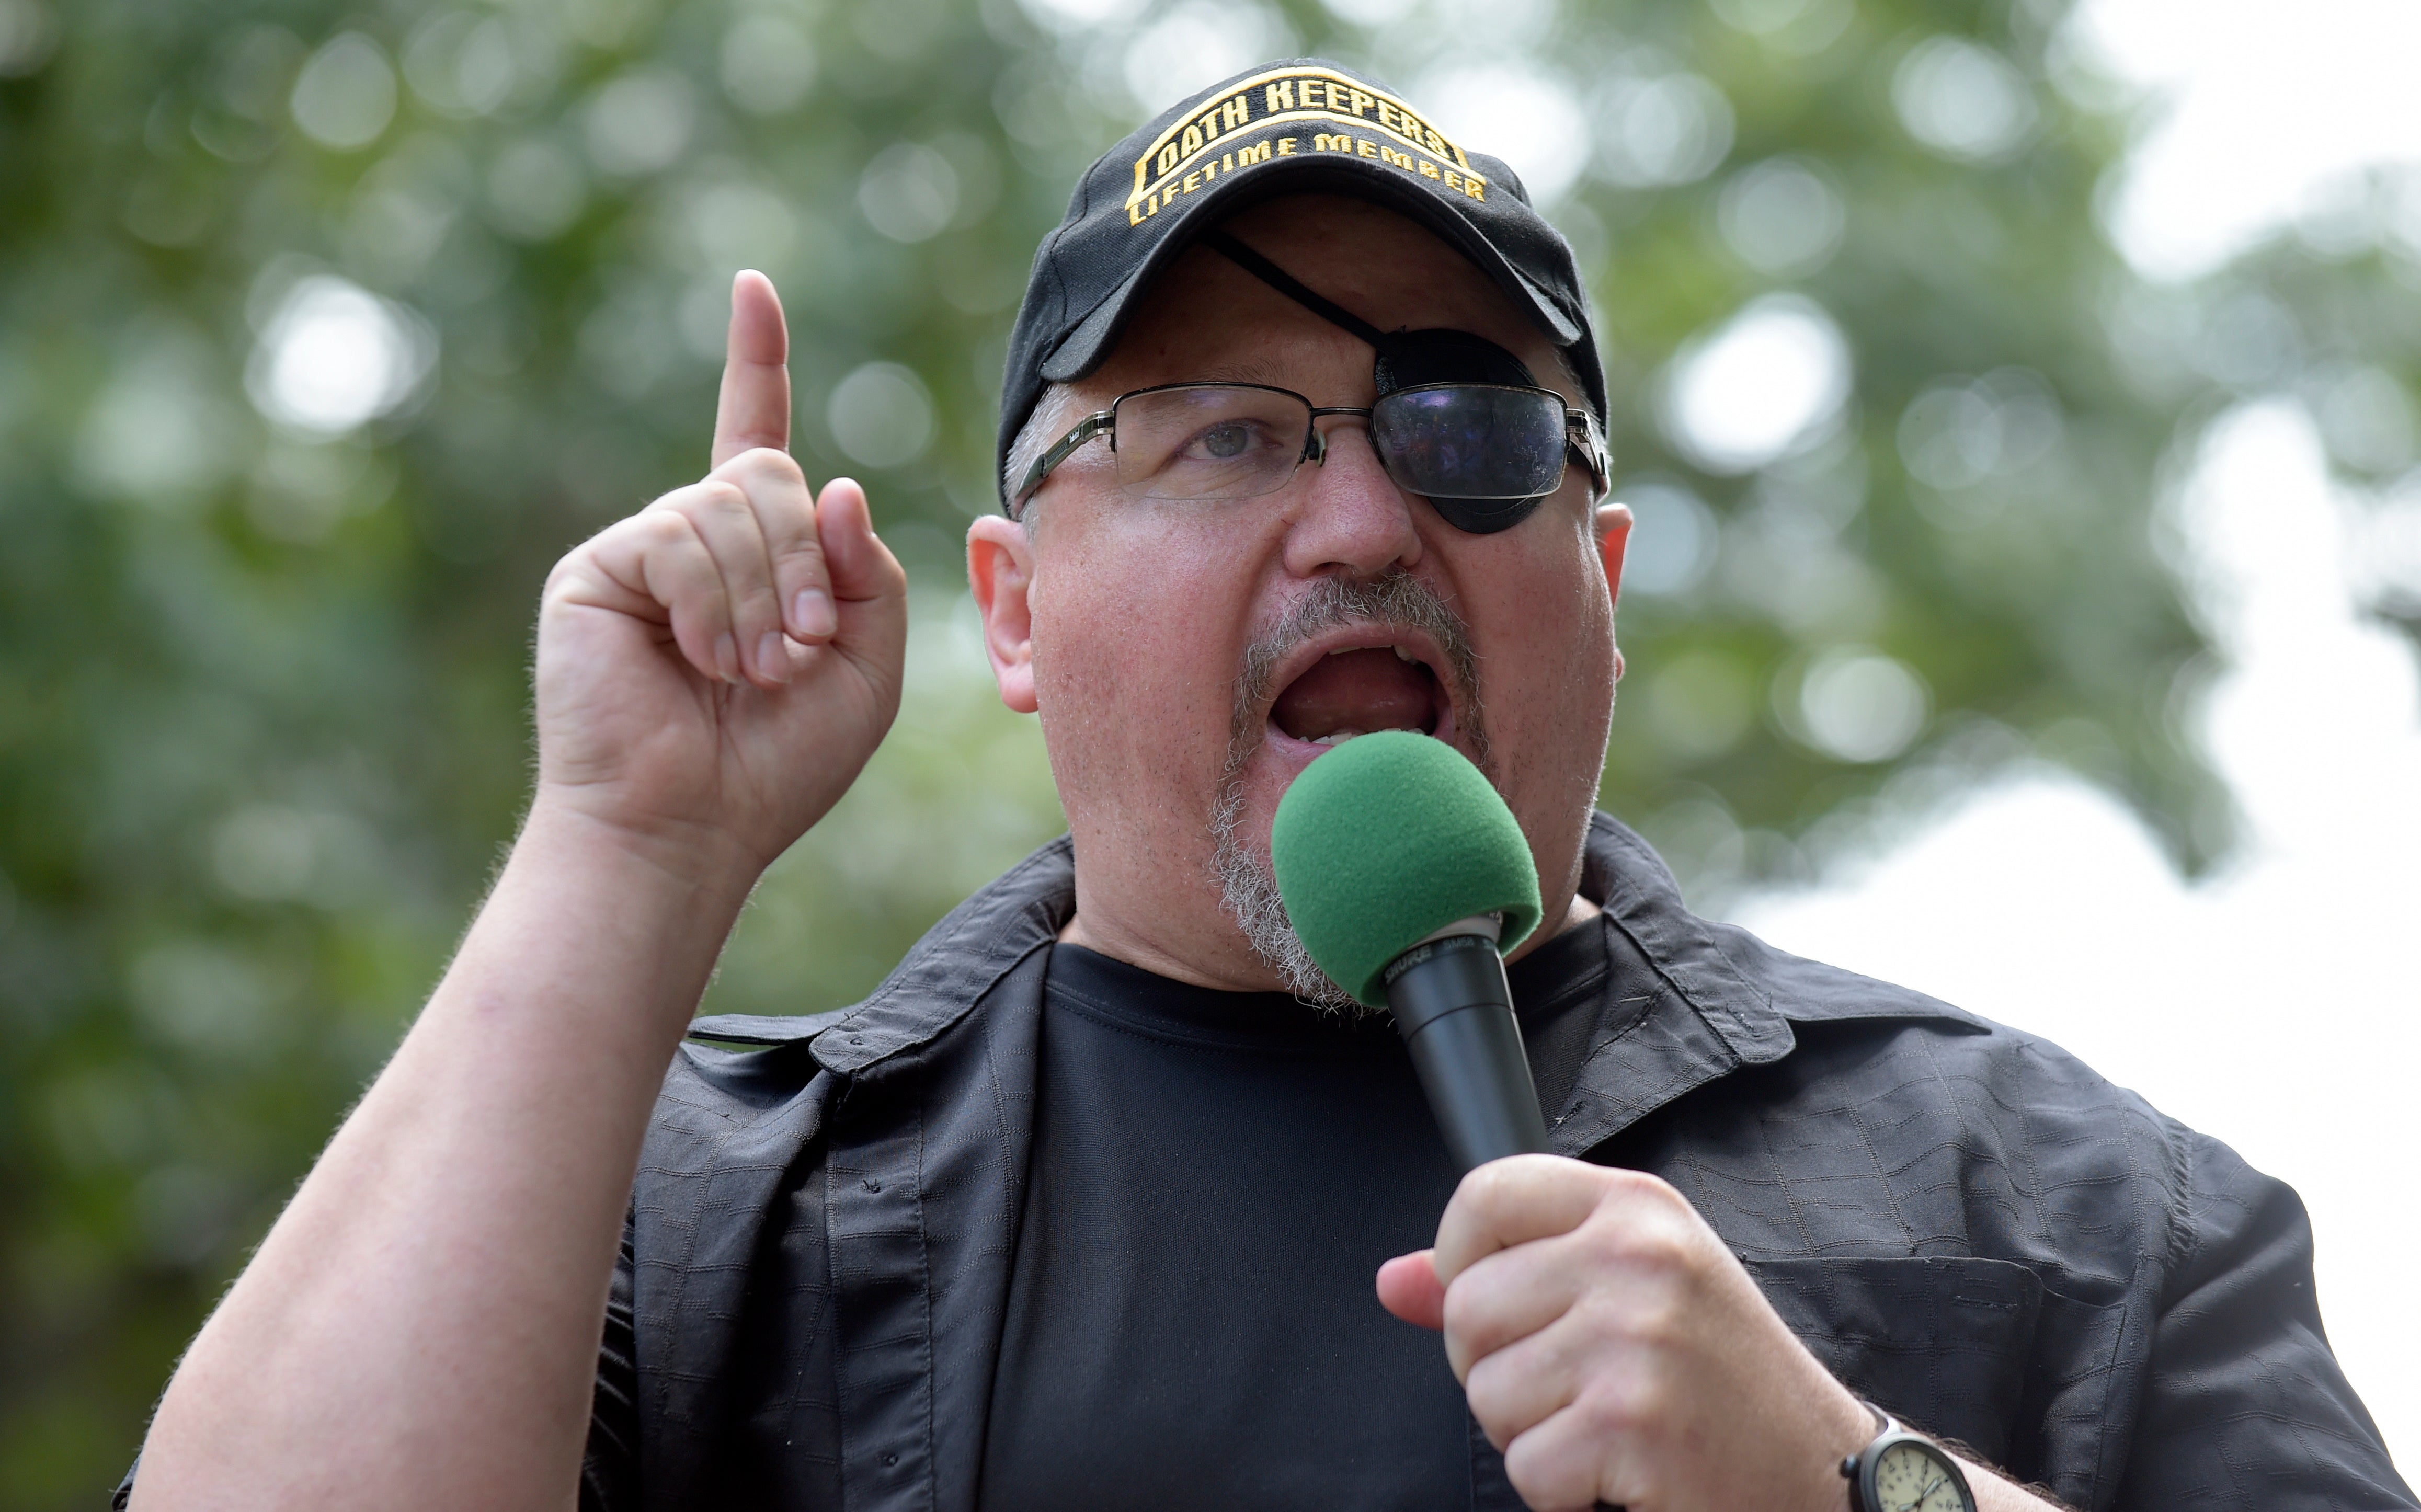 Stewart Rhodes, leader of the Oath Keepers militia